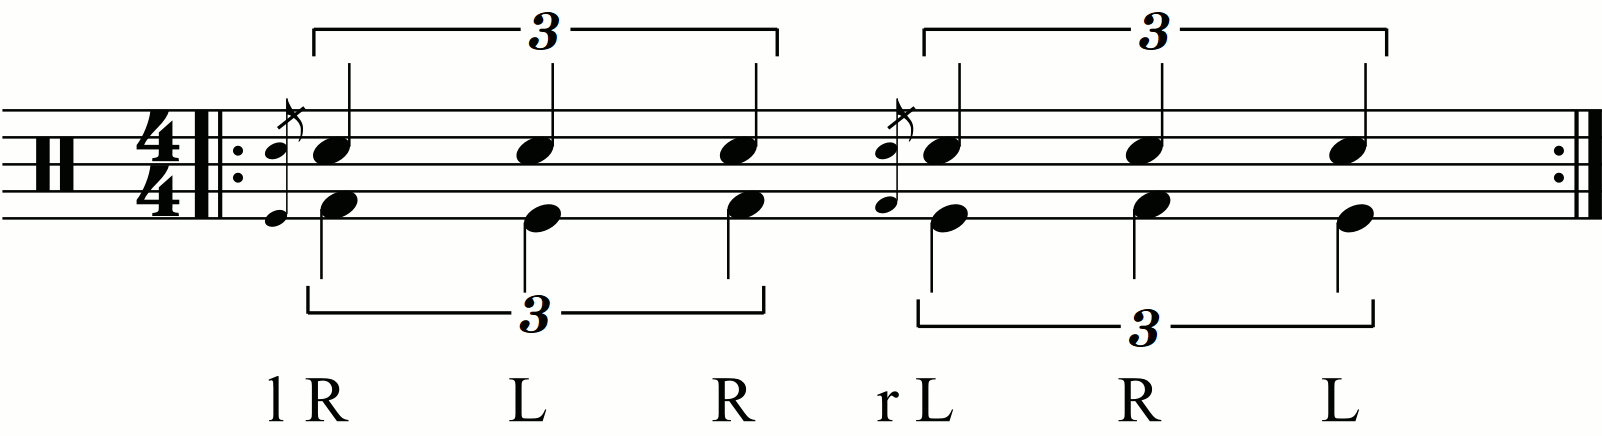 The quarter note exercise with double kick.